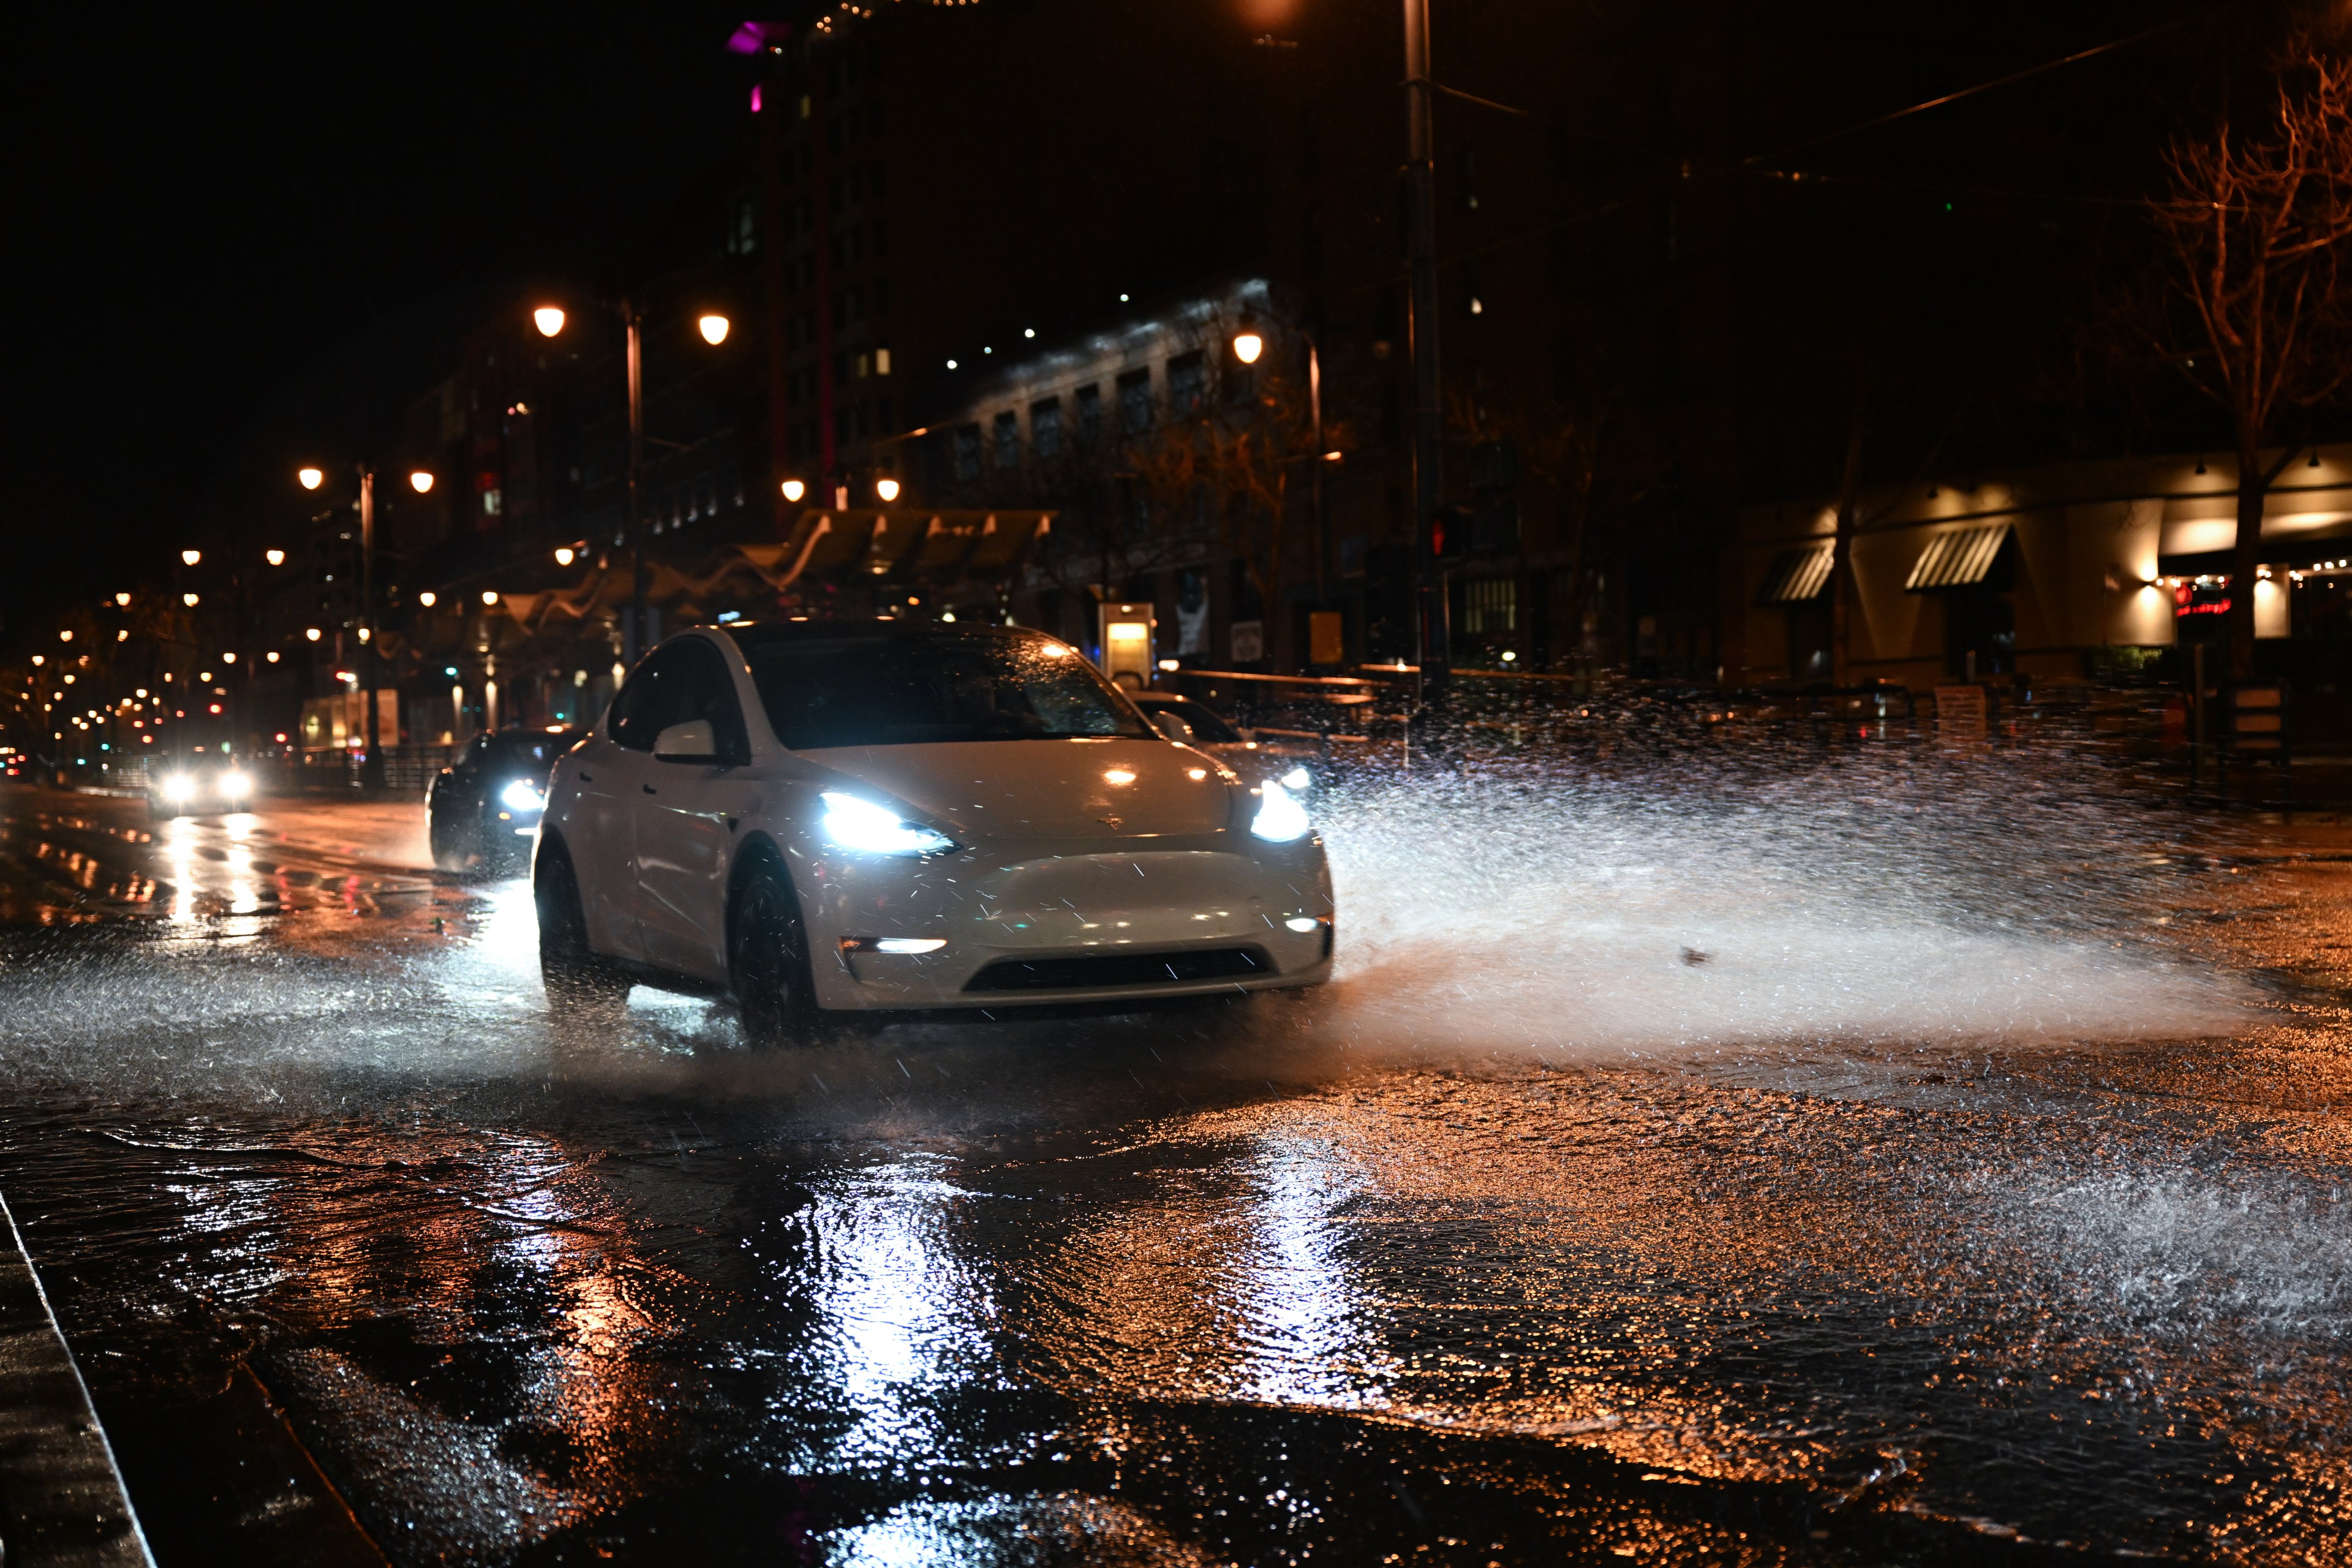 CALIFORNIA, USA - FEBRUARY 04: Cars pass through a flood on Embarcadero in San Francisco, as atmospheric river storms hit California, United States on February 04, 2024. (Photo by Tayfun Coskun/Anadolu via Getty Images)